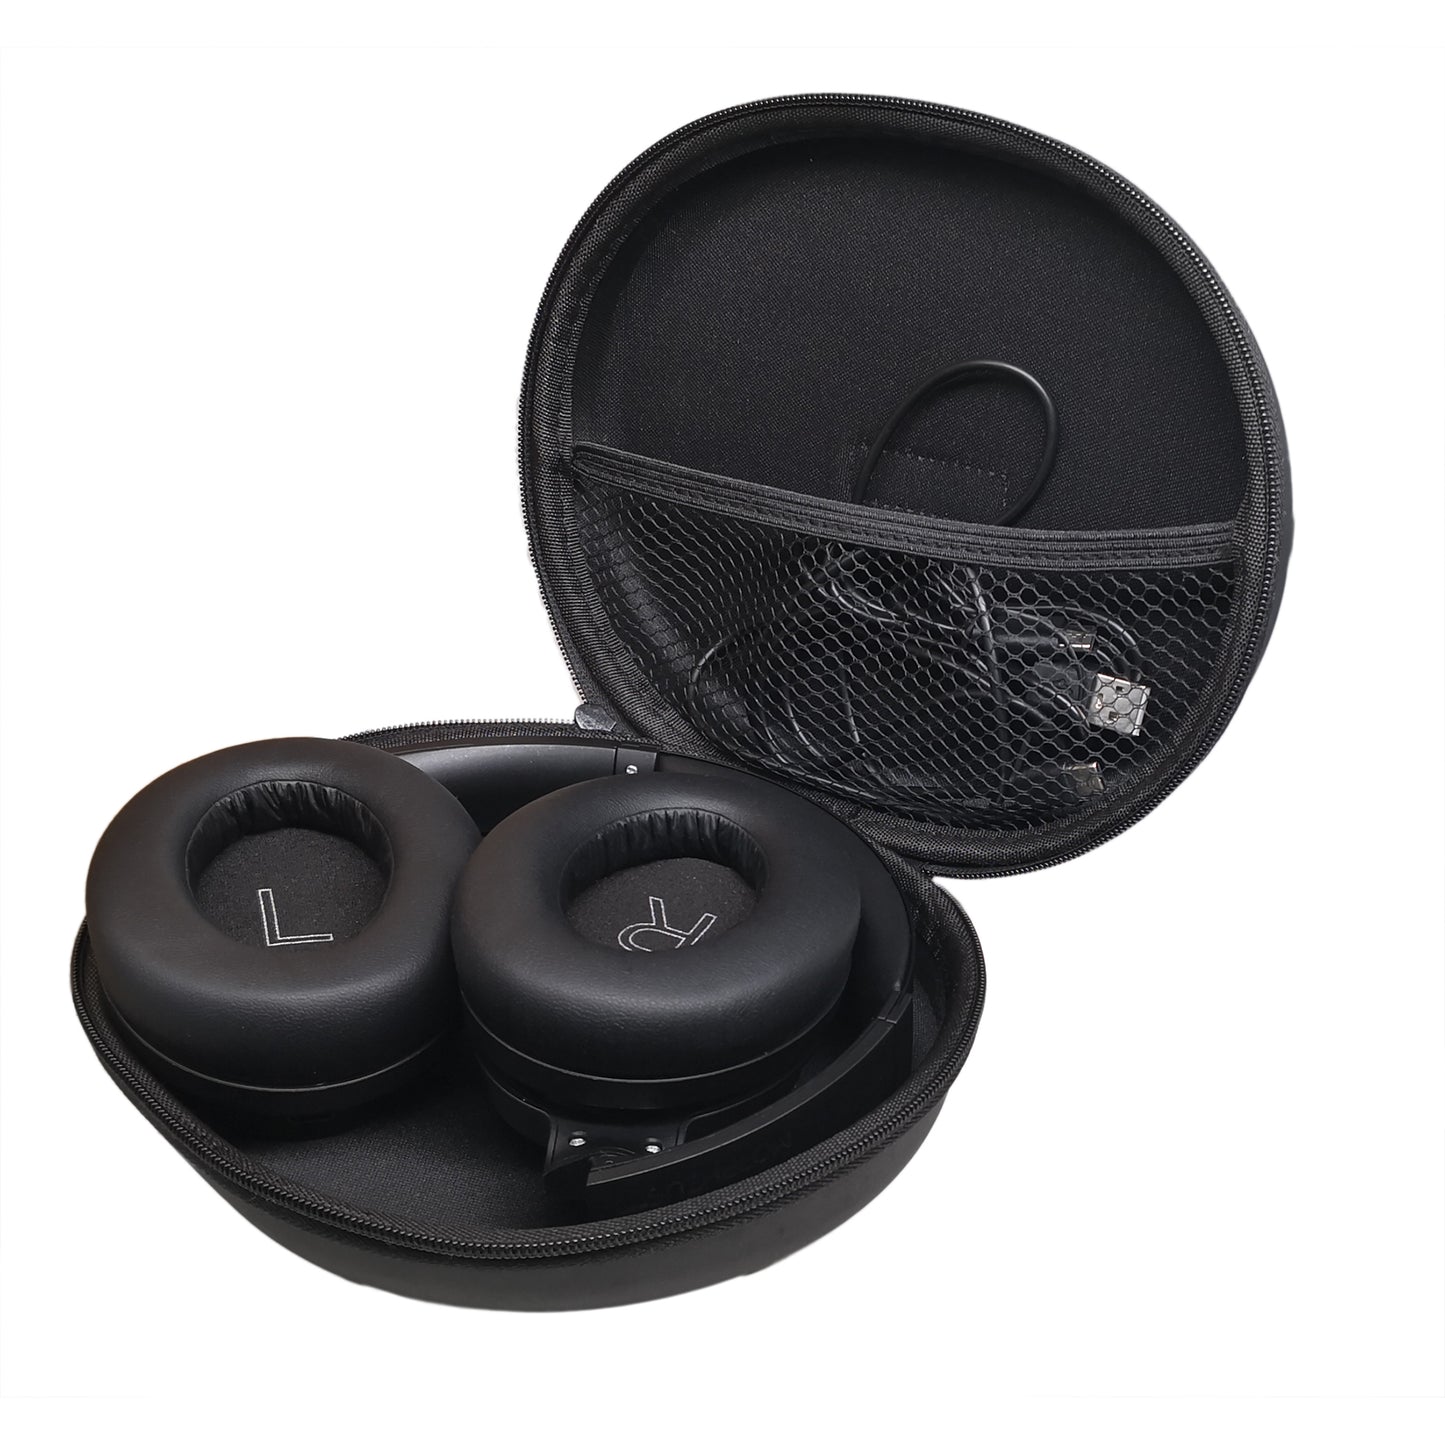 Photo of Morpheus 360 Synergy HD Active Noise Cancelling Wireless Headphones displayed in the included hardshell travel case.